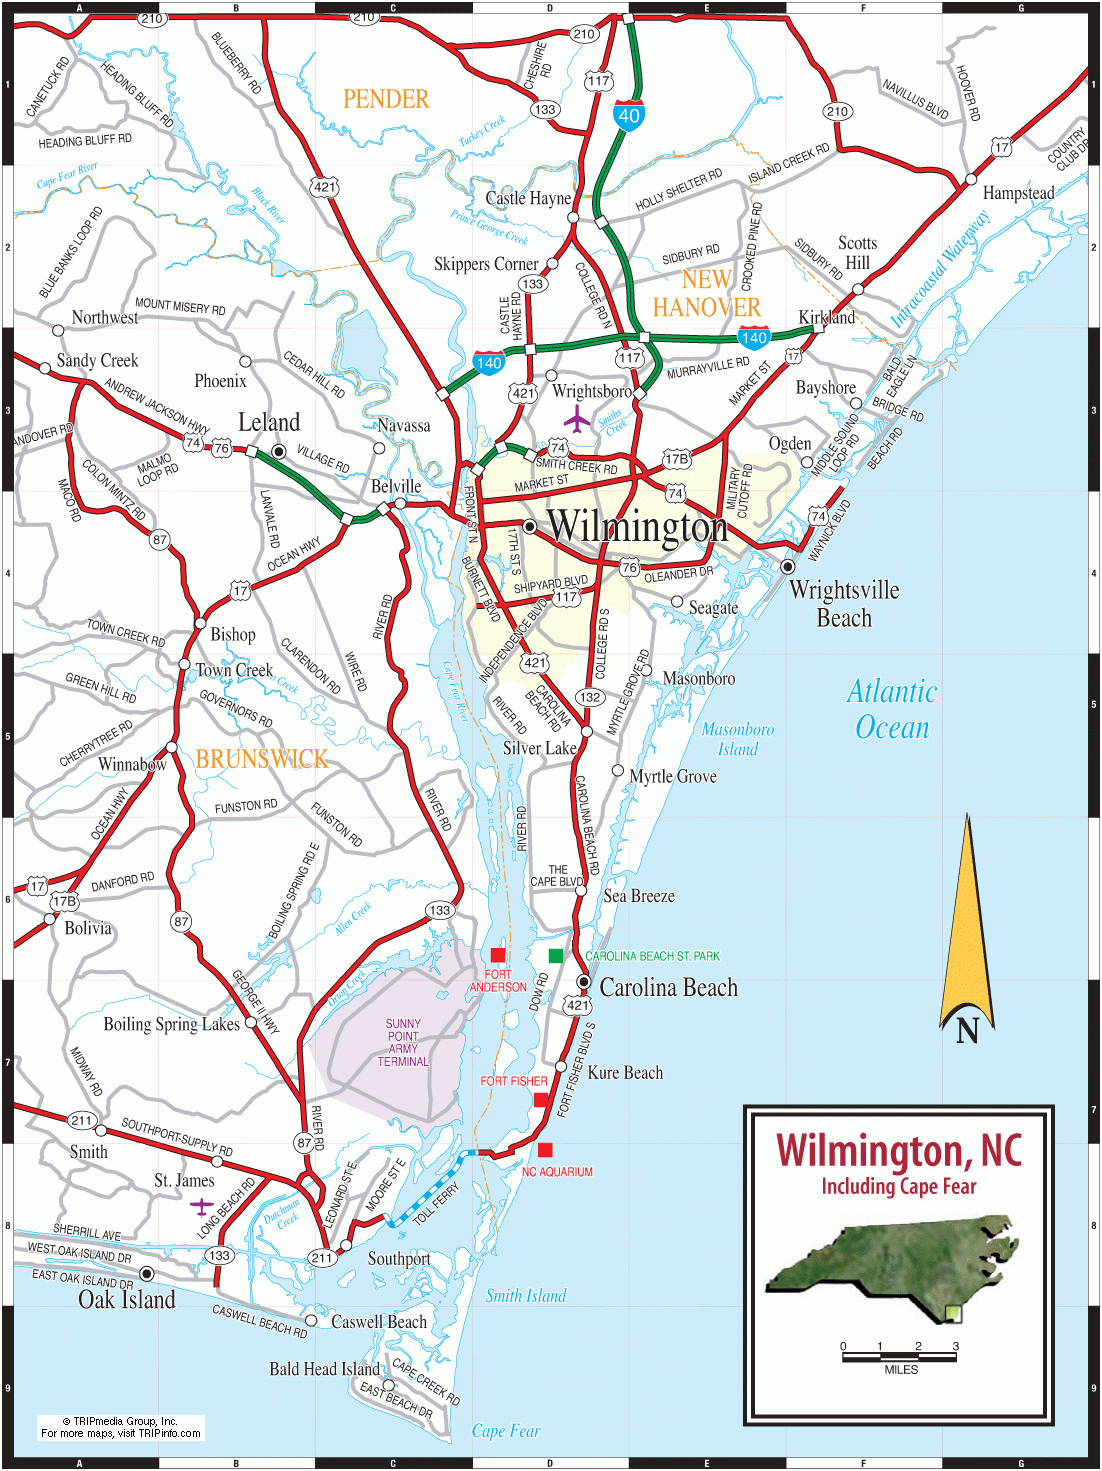 Map Of Wilmington Nc - Google Search | Maps - U.s. | Pinterest - Printable Map Of Wilmington Nc